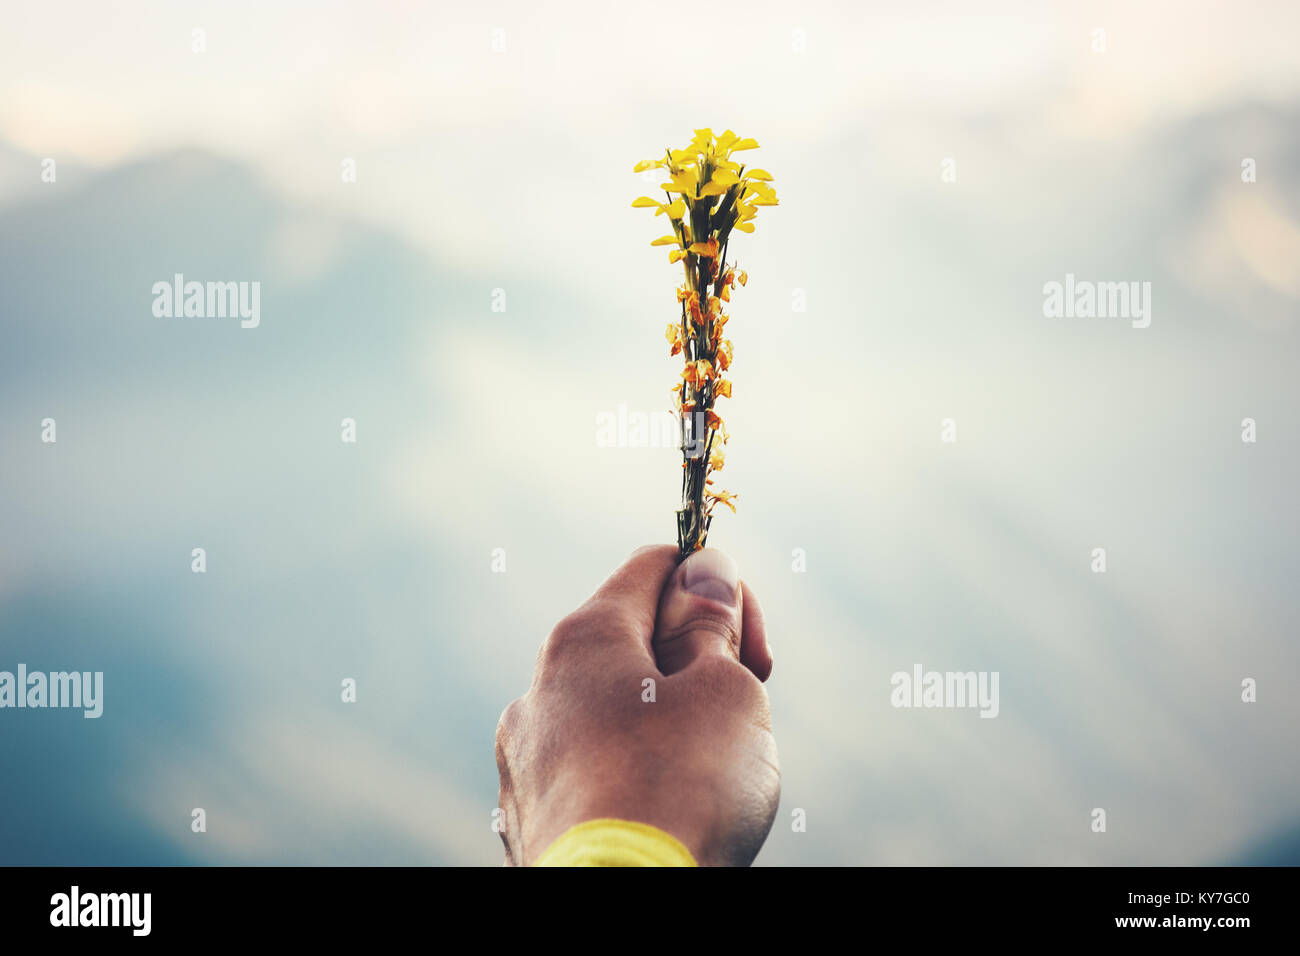 Hand holding yellow flowers Mountains Landscape on background Summer Travel wild nature scenic view Stock Photo